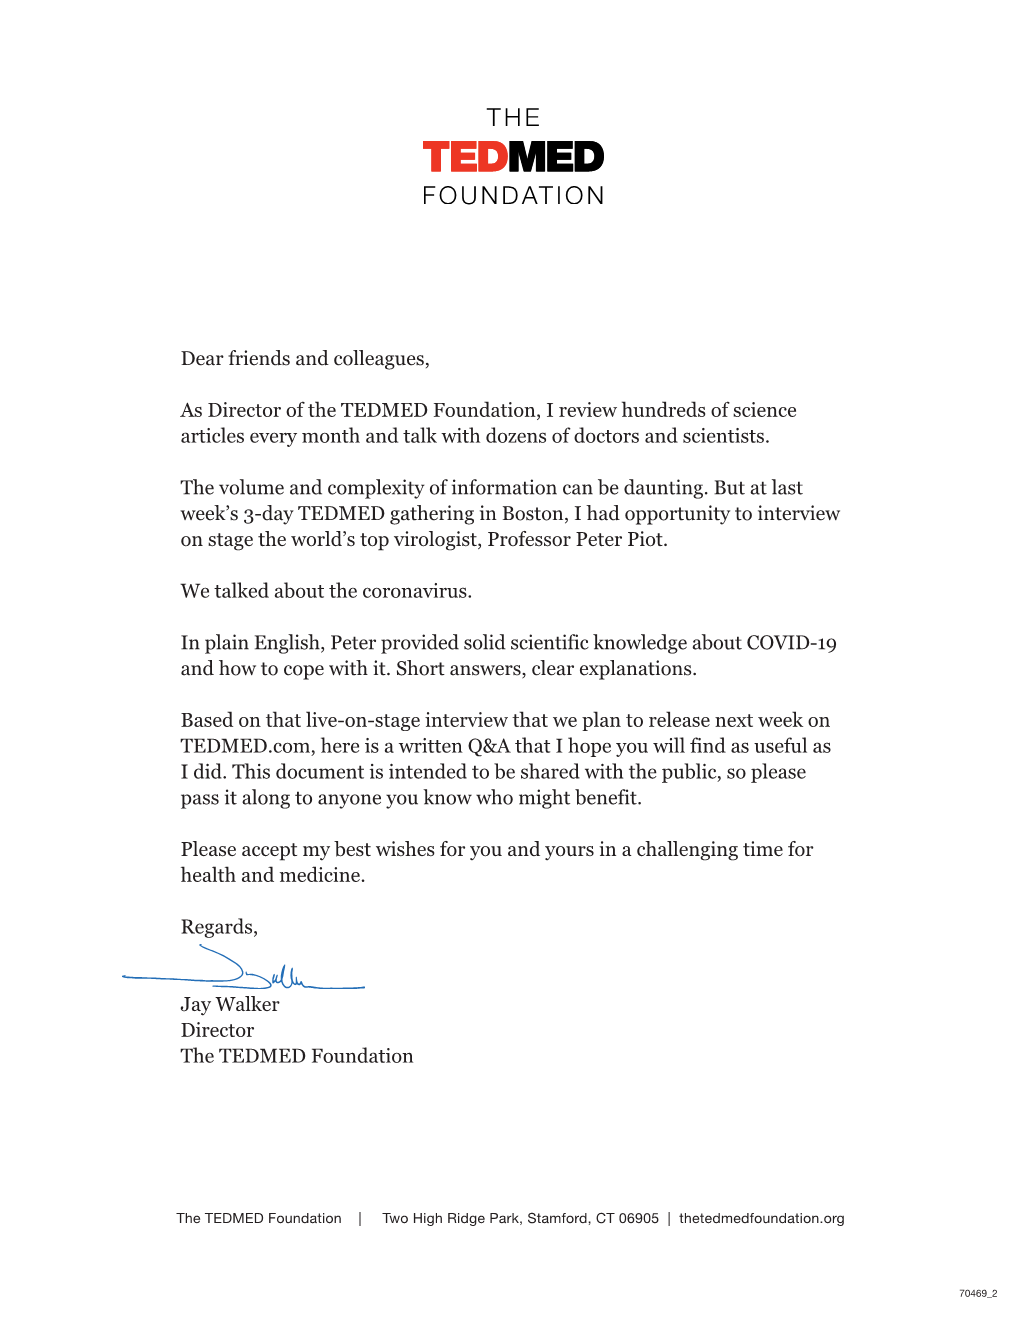 Dear Friends and Colleagues, As Director of the TEDMED Foundation